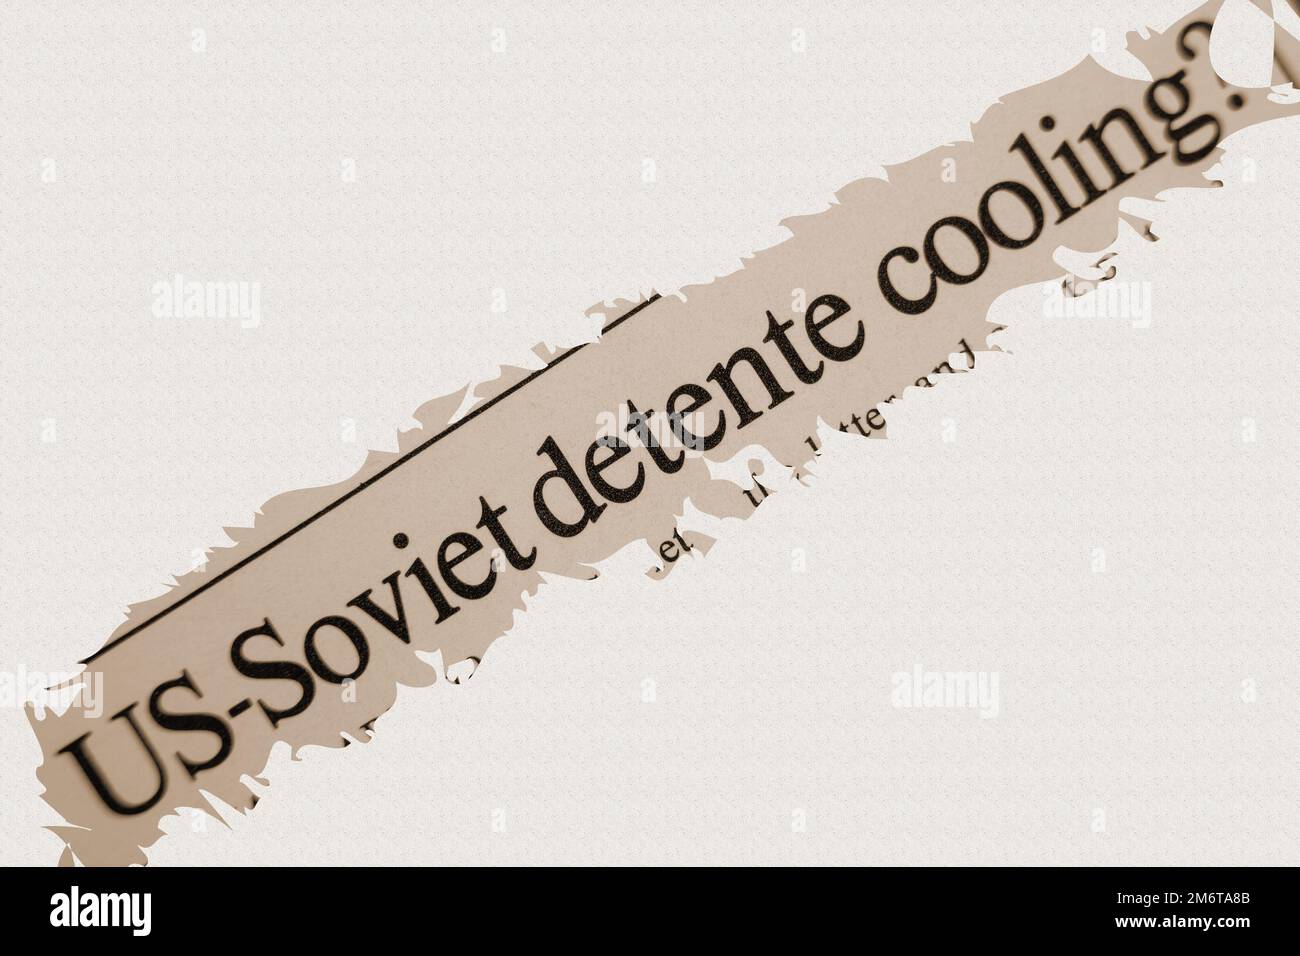 news story from 1975 newspaper headline article title - US-Soviet detente cooling in sepia Stock Photo